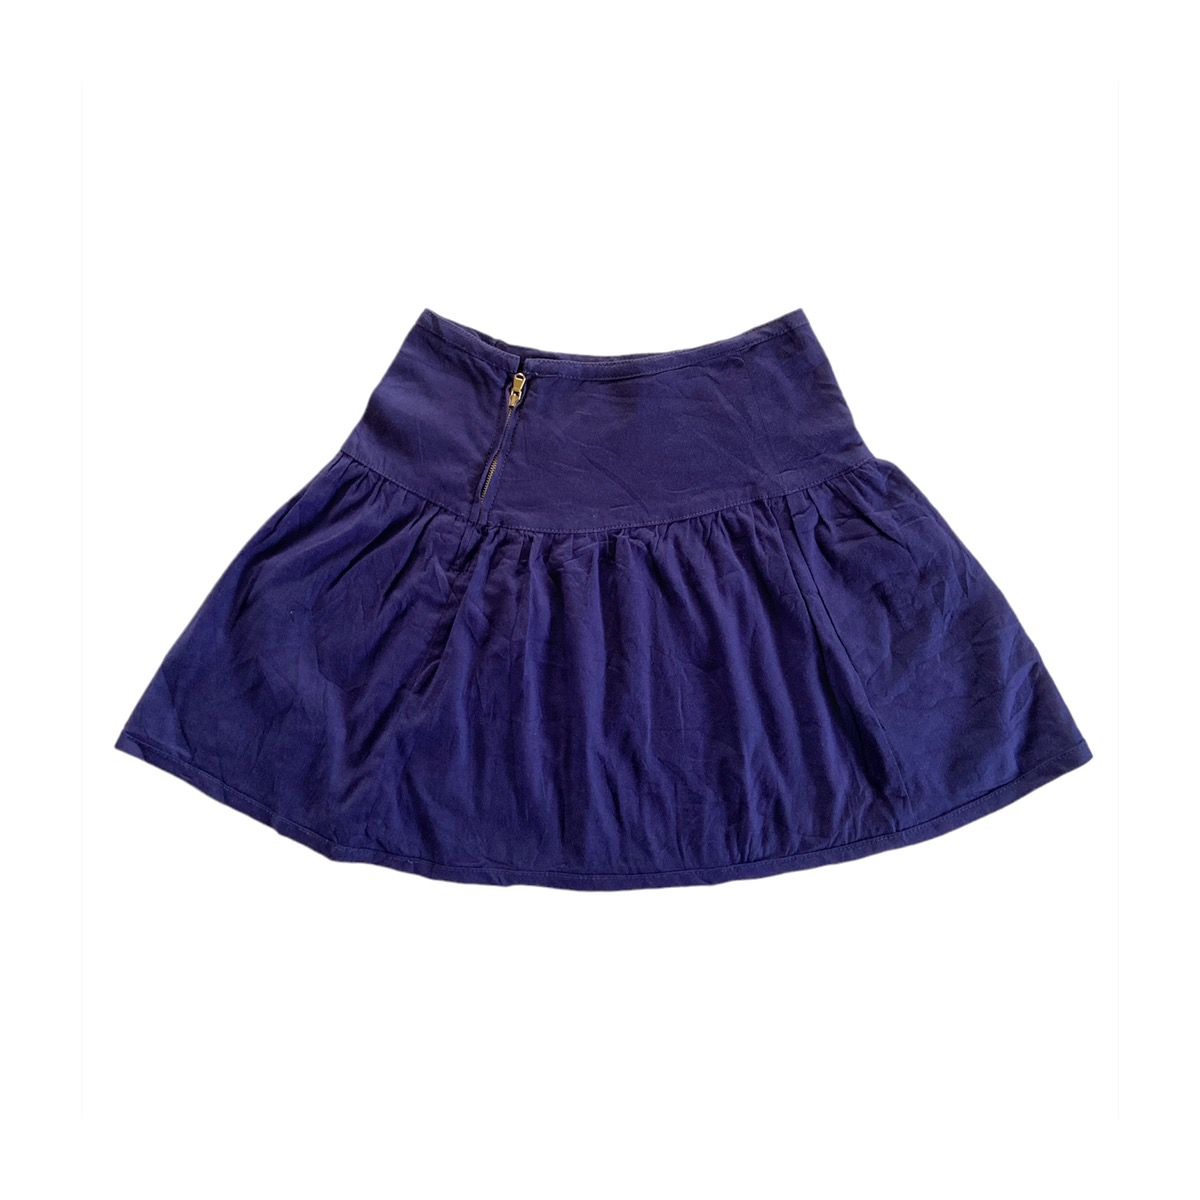 Marc by Marc Jacobs Mini Skirt - 1